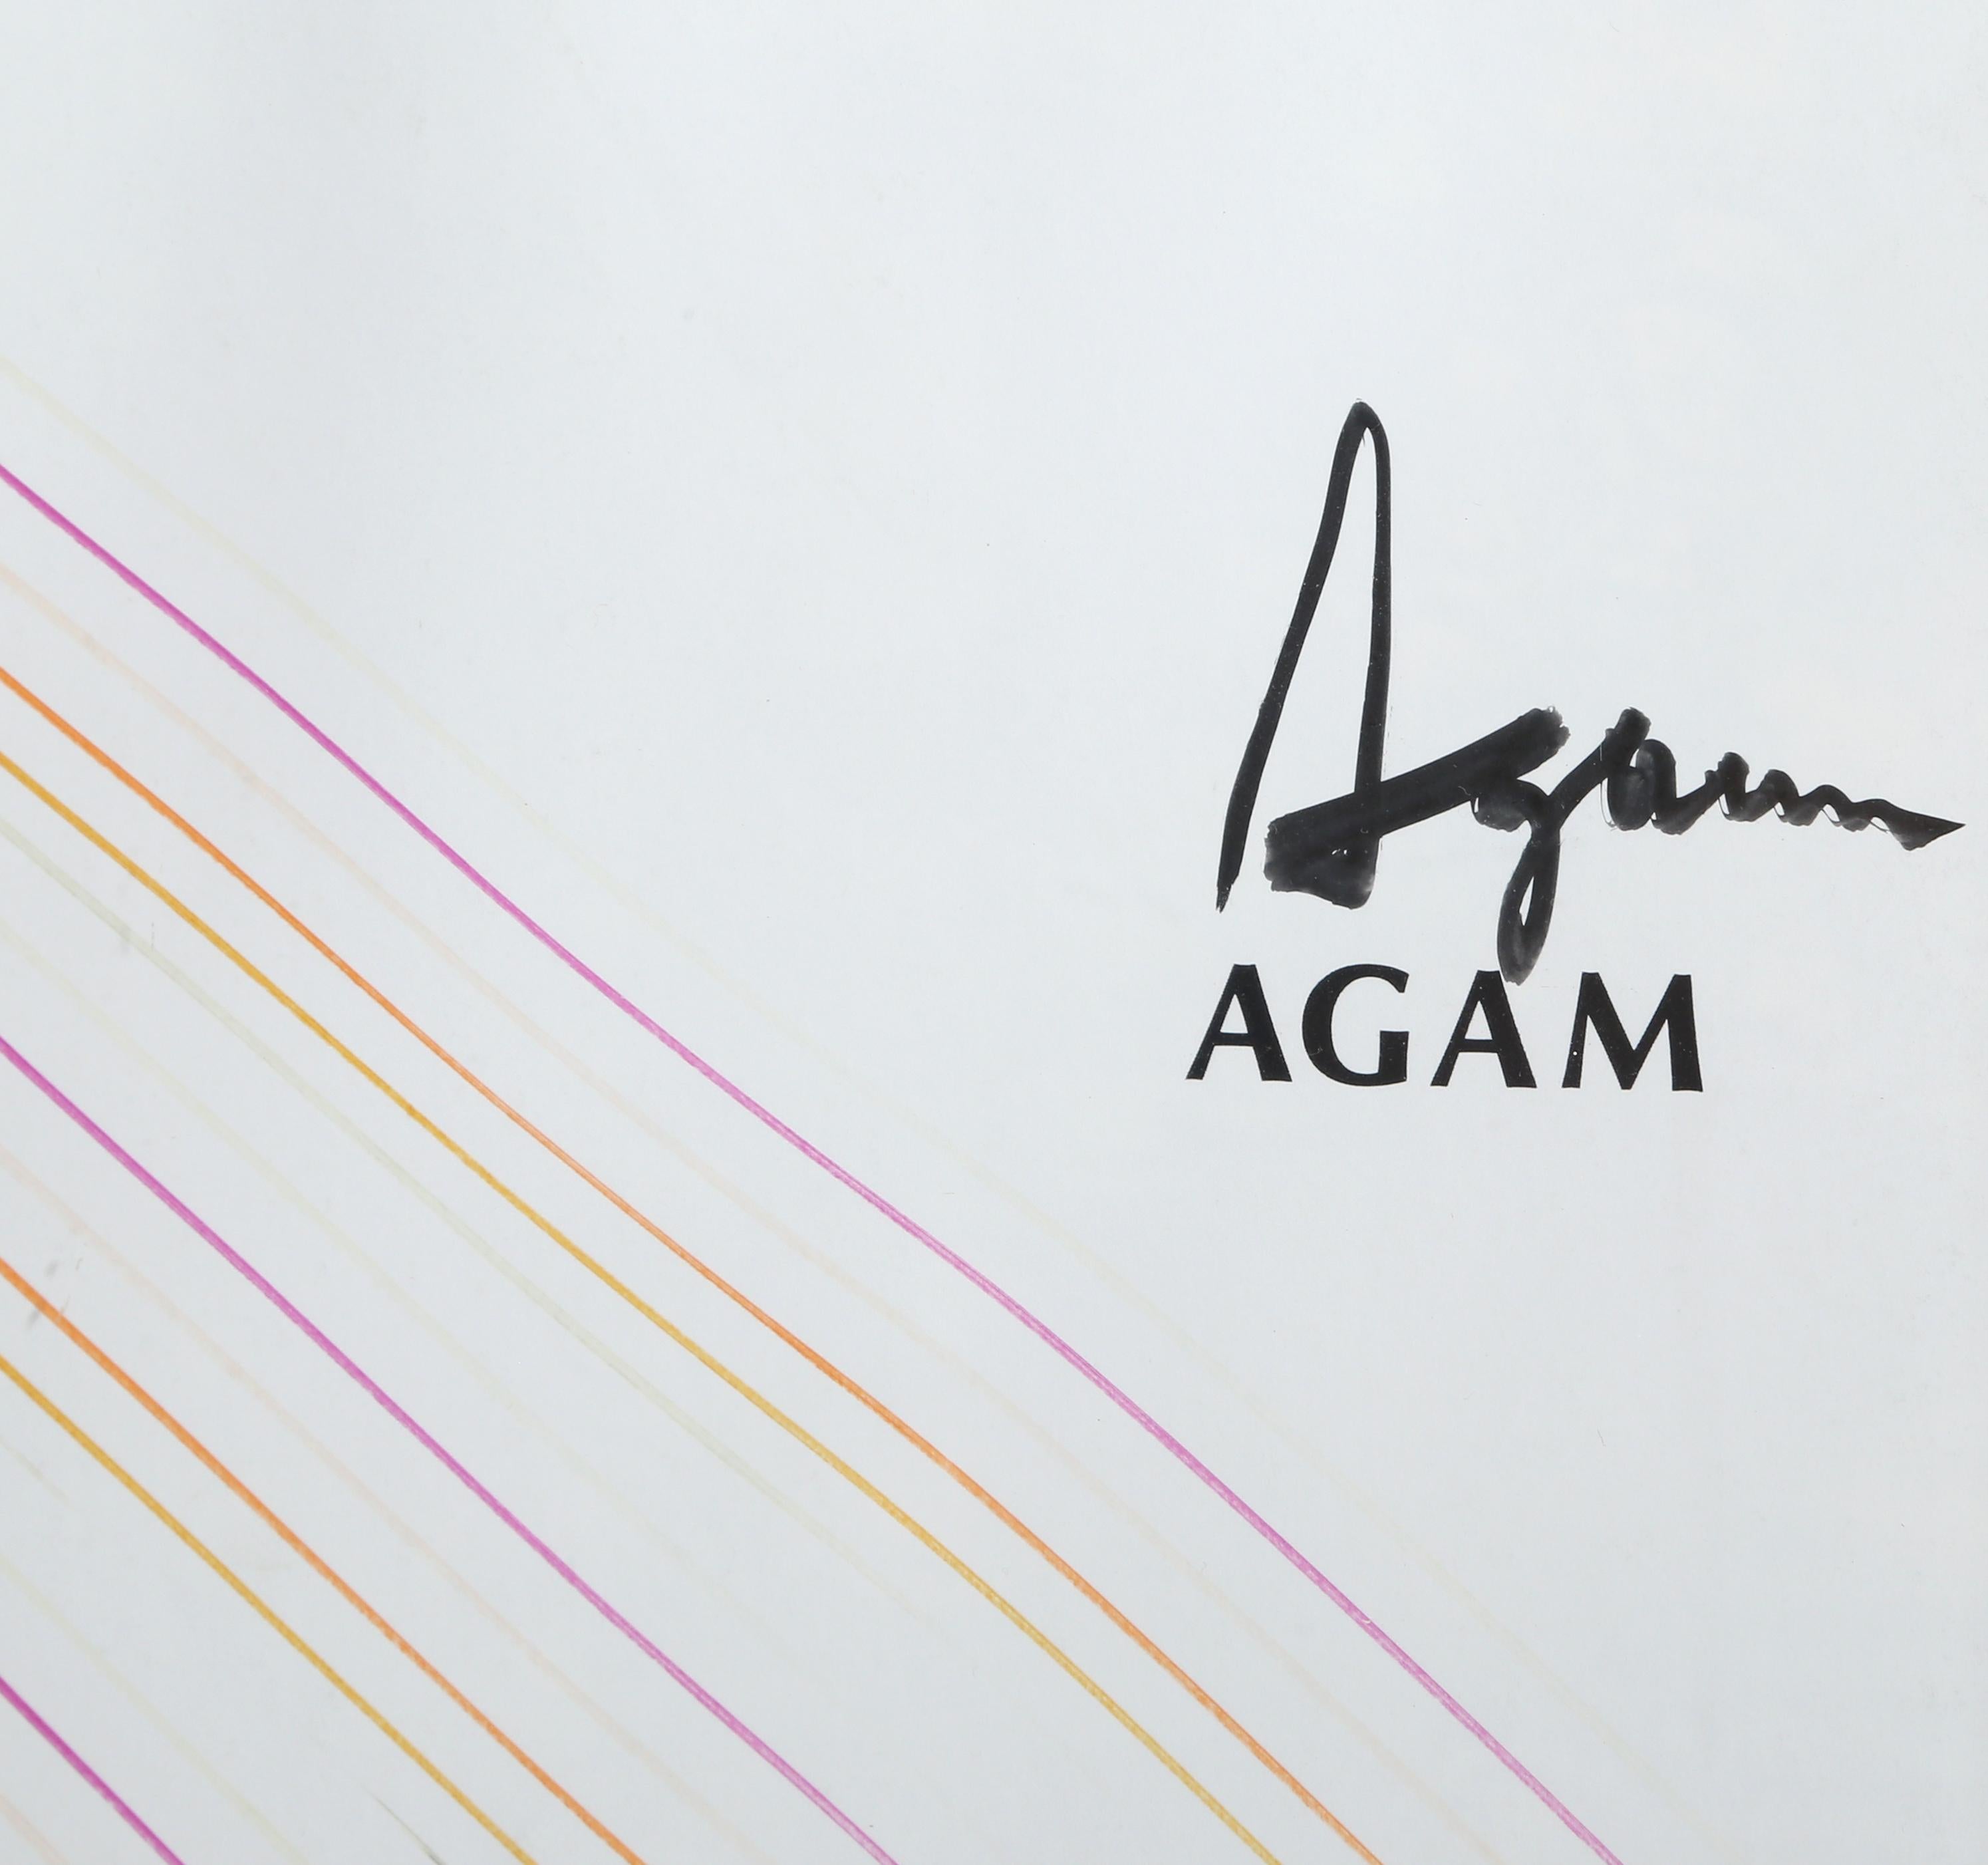 Beyond the Visible, Original Marker Drawing by Agam - Art by Yaacov Agam